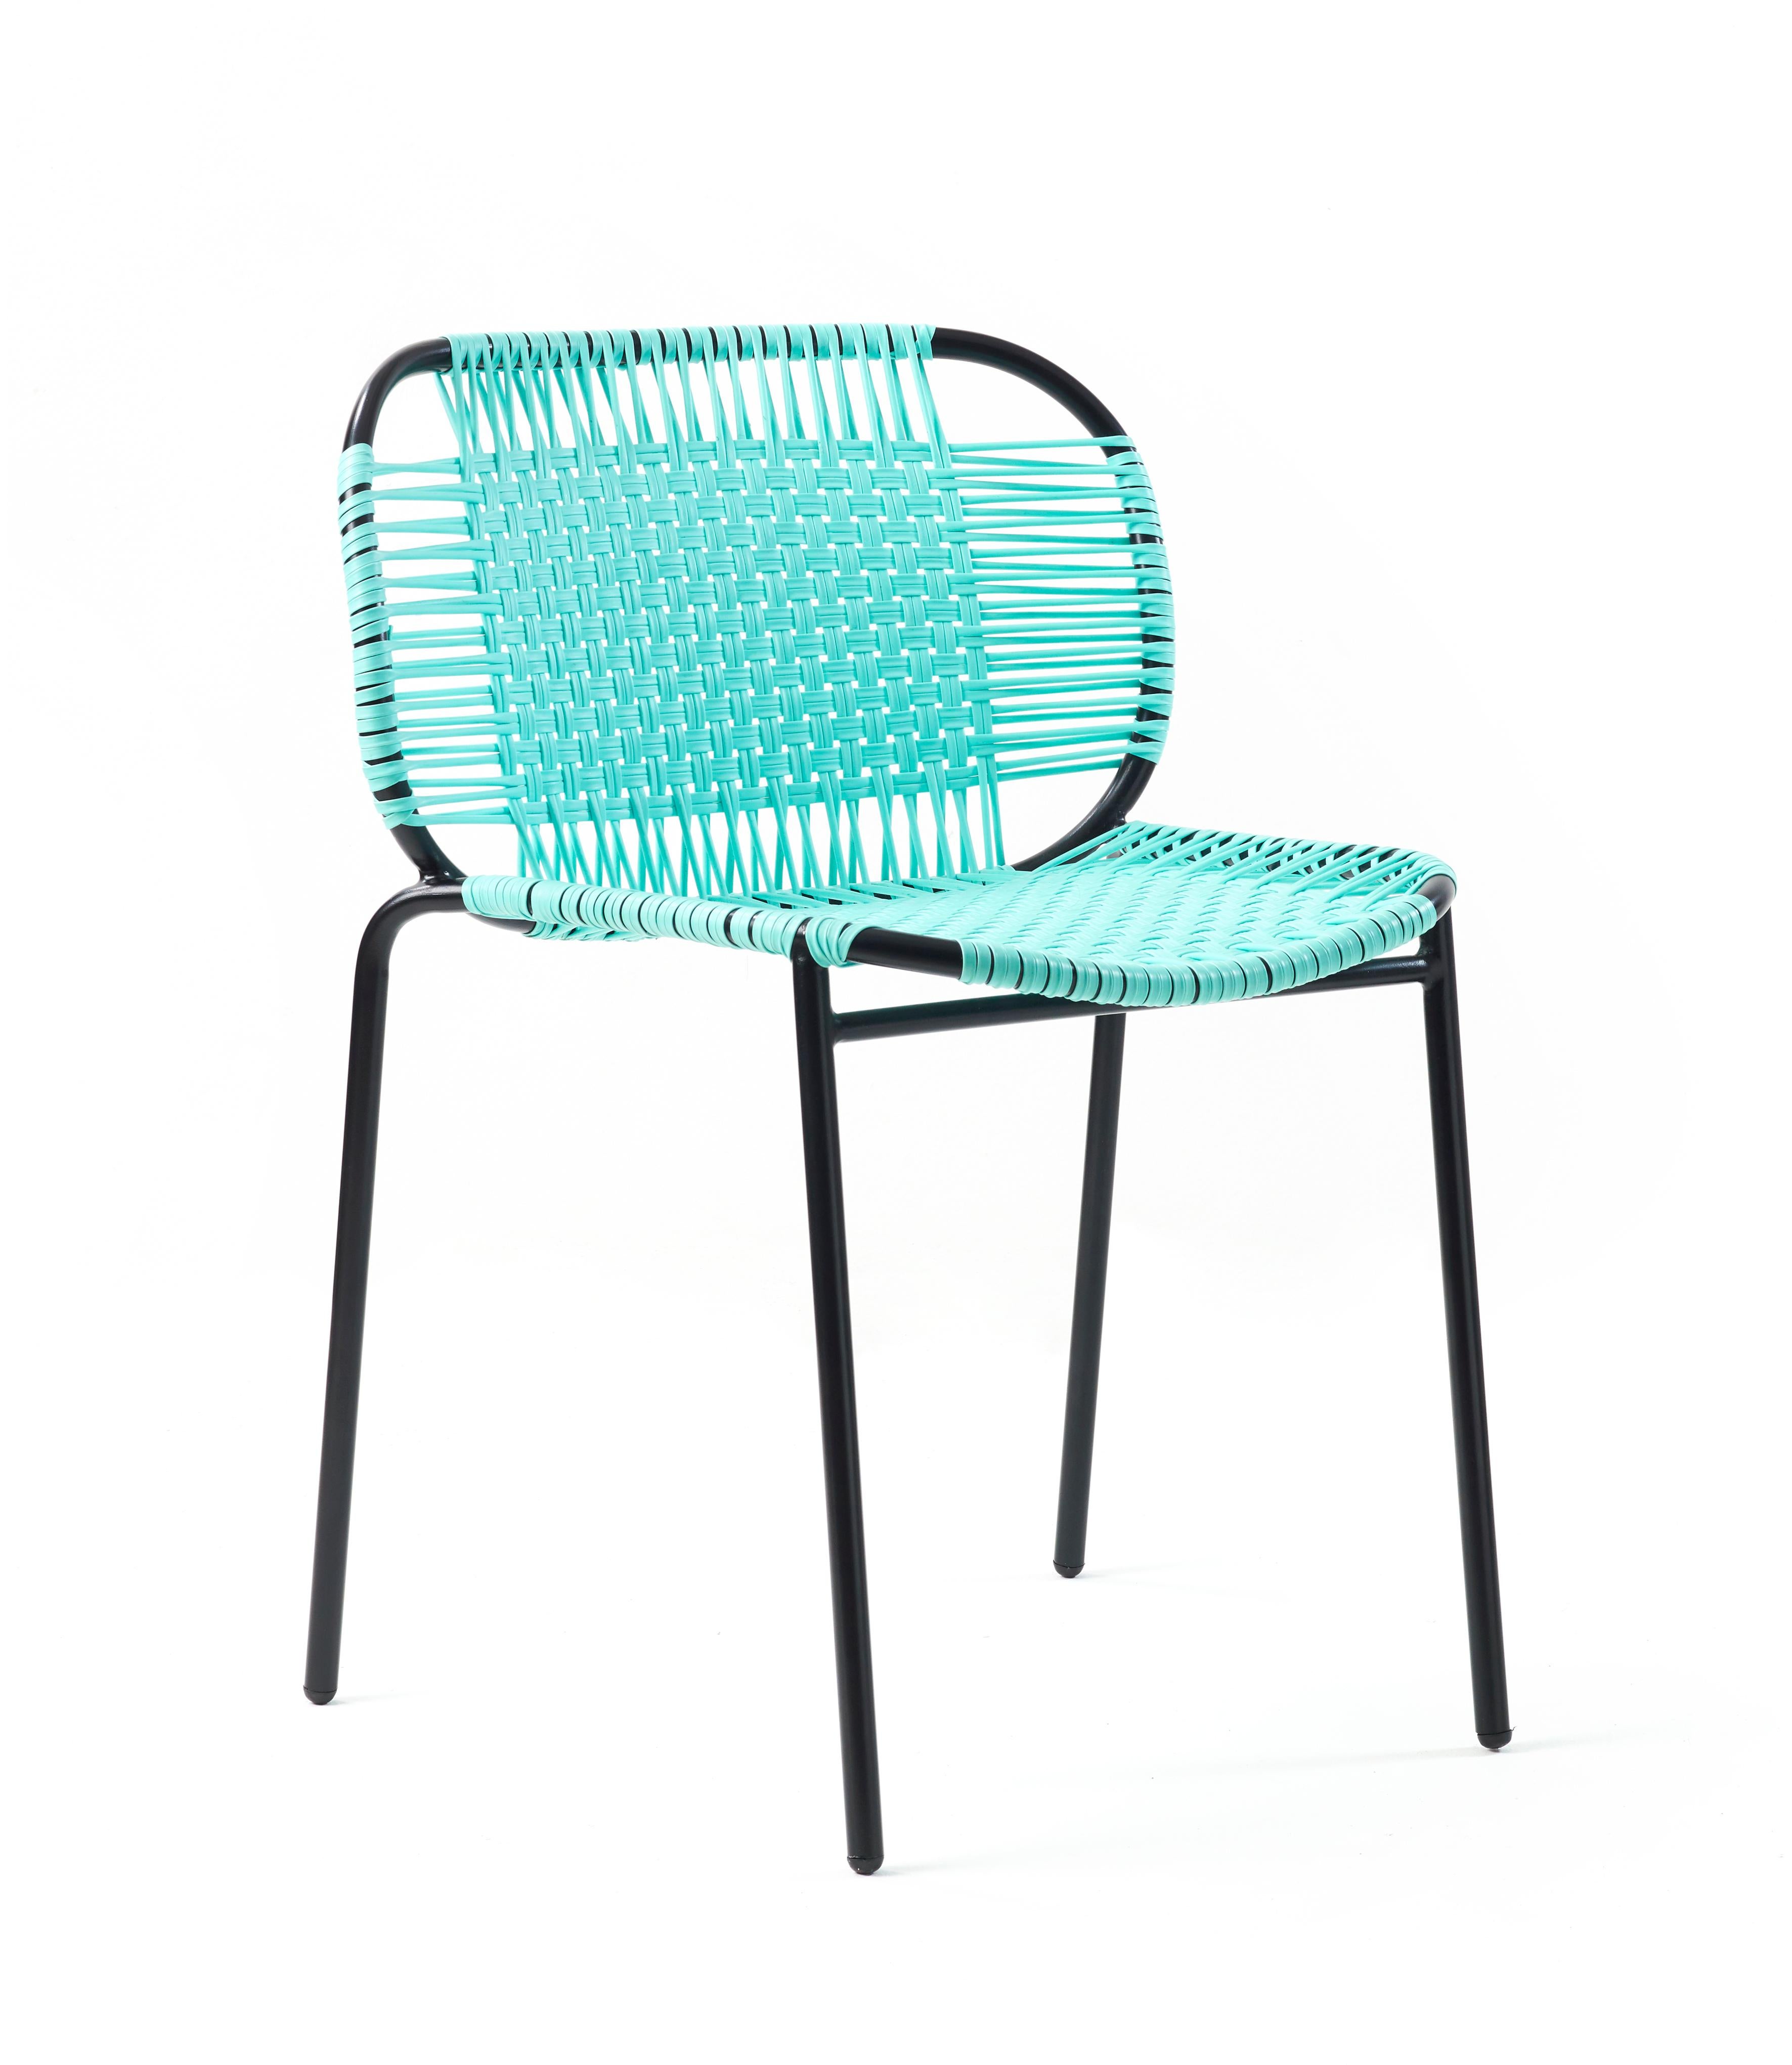 Set of 2 mint cielo stacking chair by Sebastian Herkner.
Materials: PVC strings, powder-coated steel frame.
Technique: made from recycled plastic and weaved by local craftspeople in cartagena, colombia.
Dimensions: W 56 x D 51.4 x H 78 cm
Also